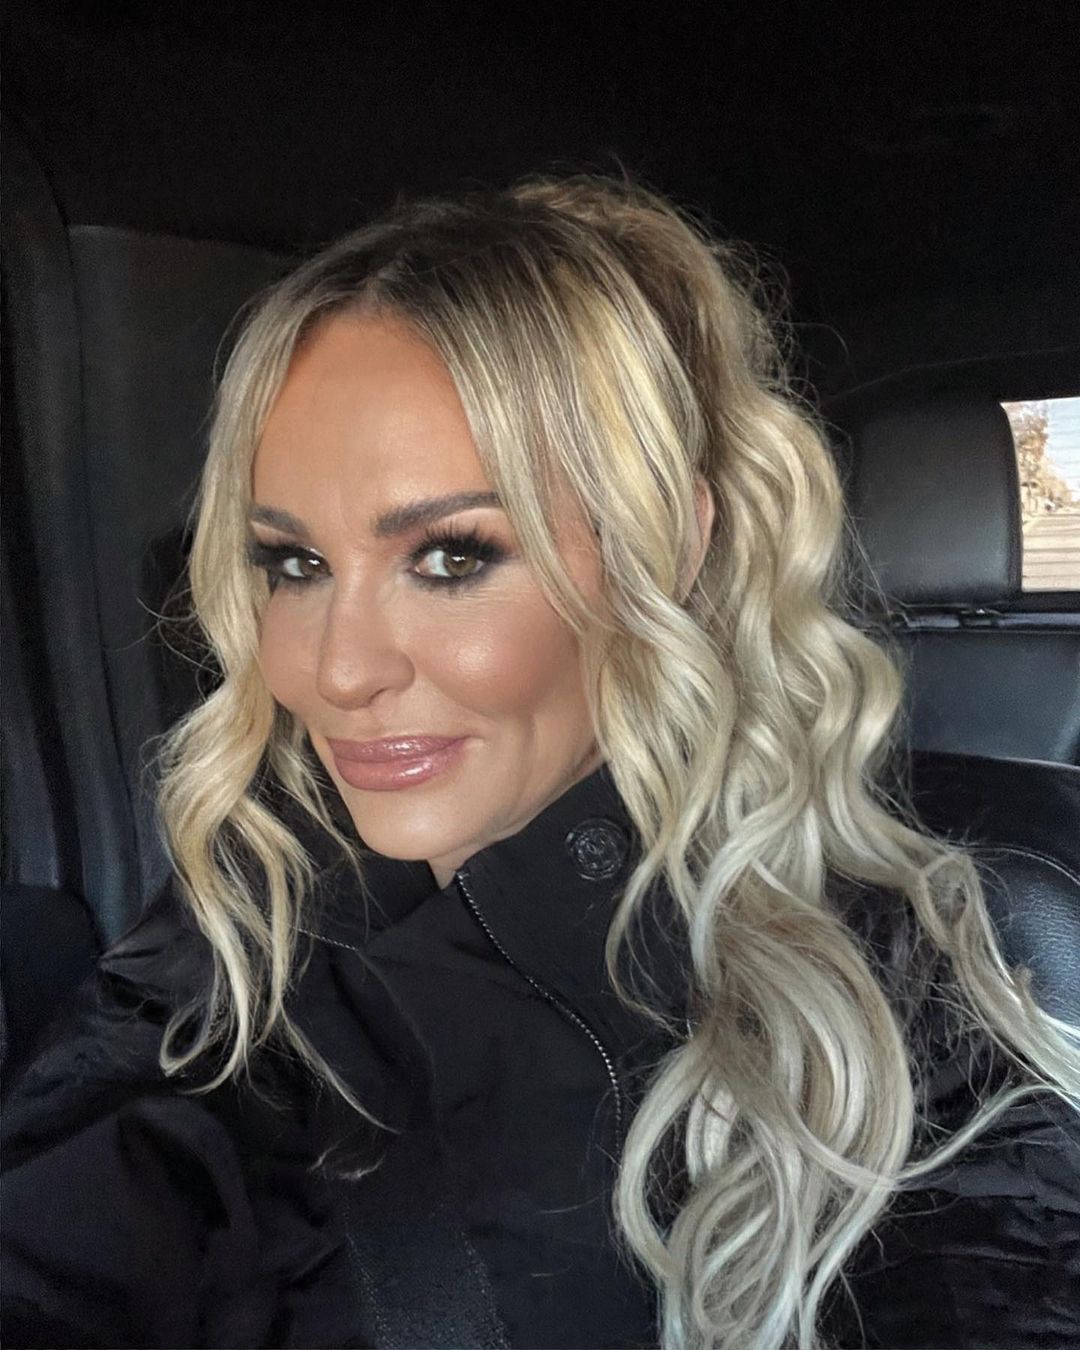 Taylor armstrong 14 hottest pics, taylor armstrong 14 instagram